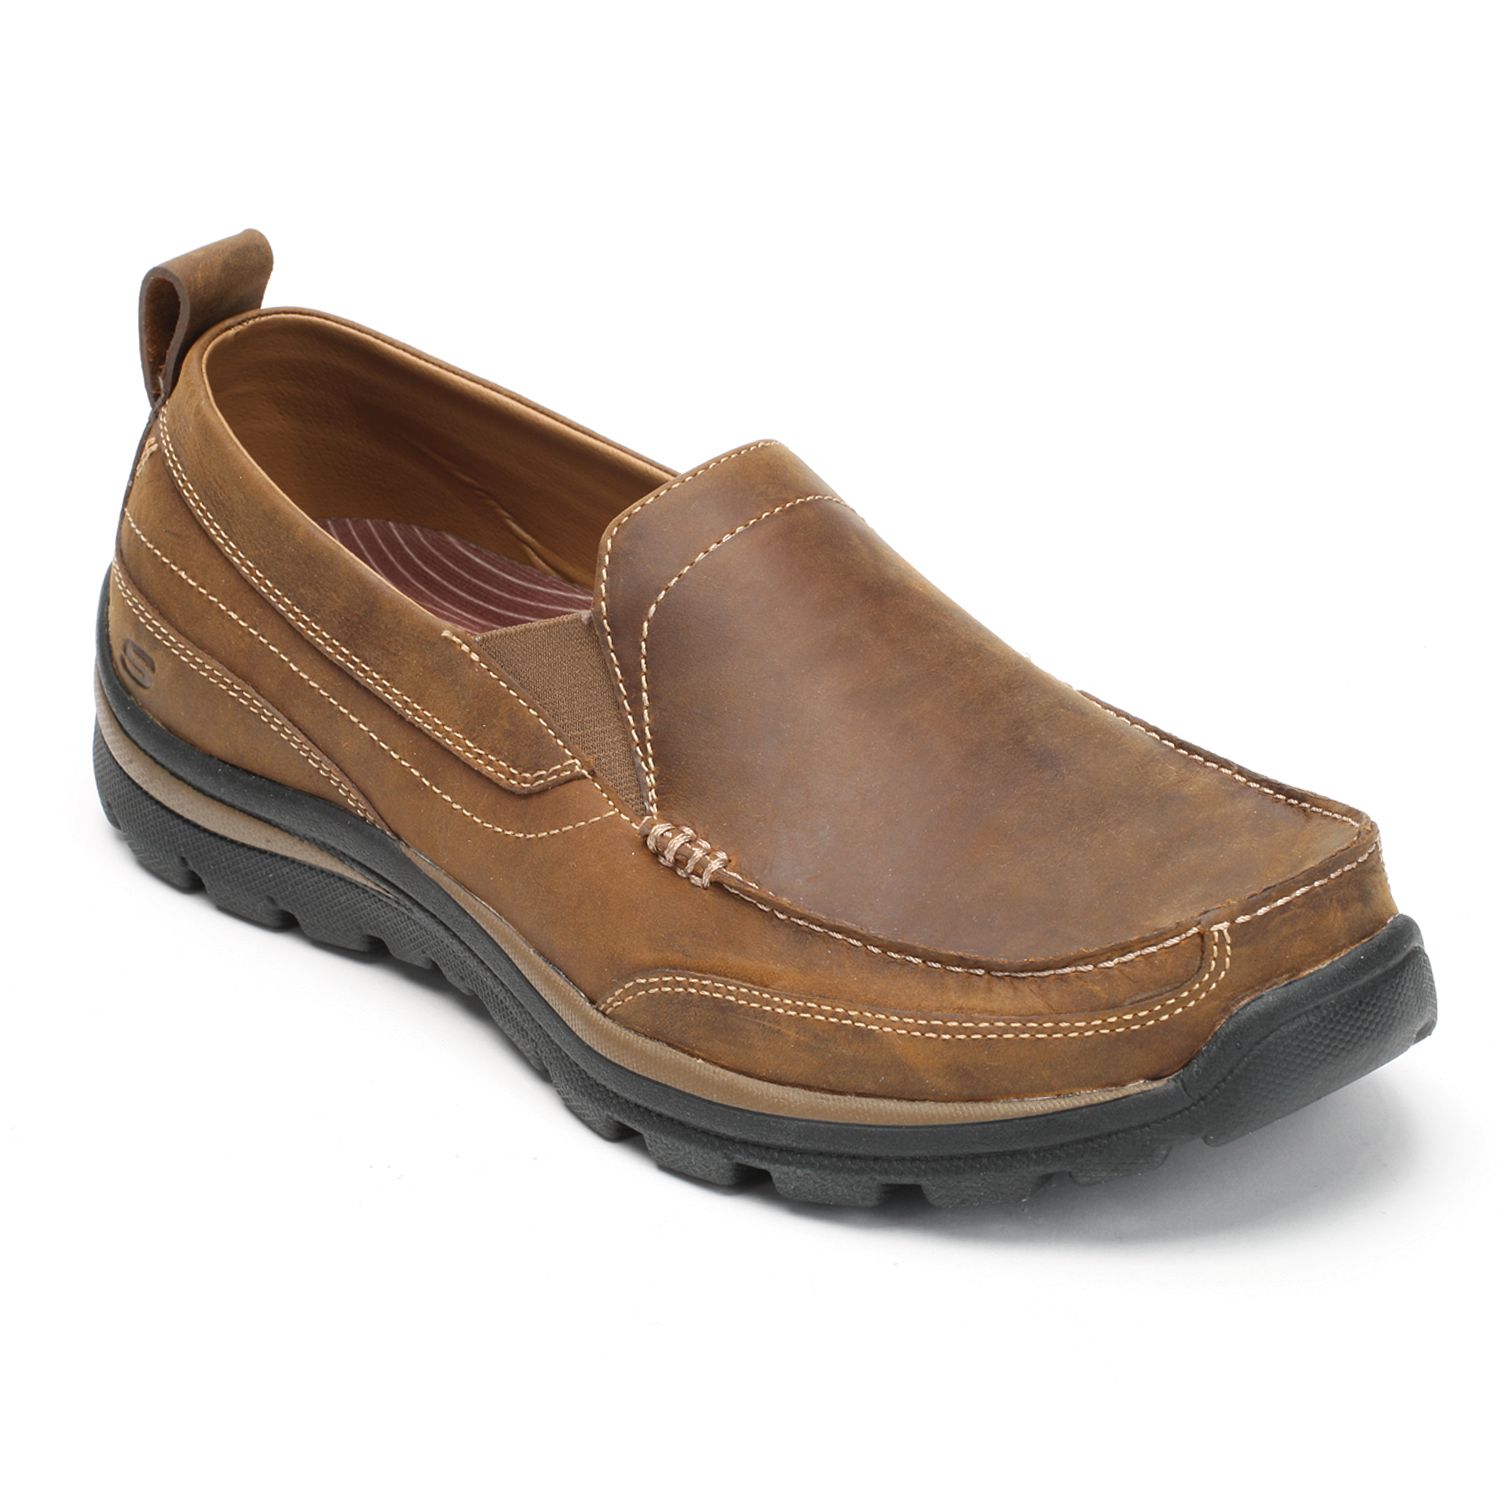 skechers relaxed fit superior